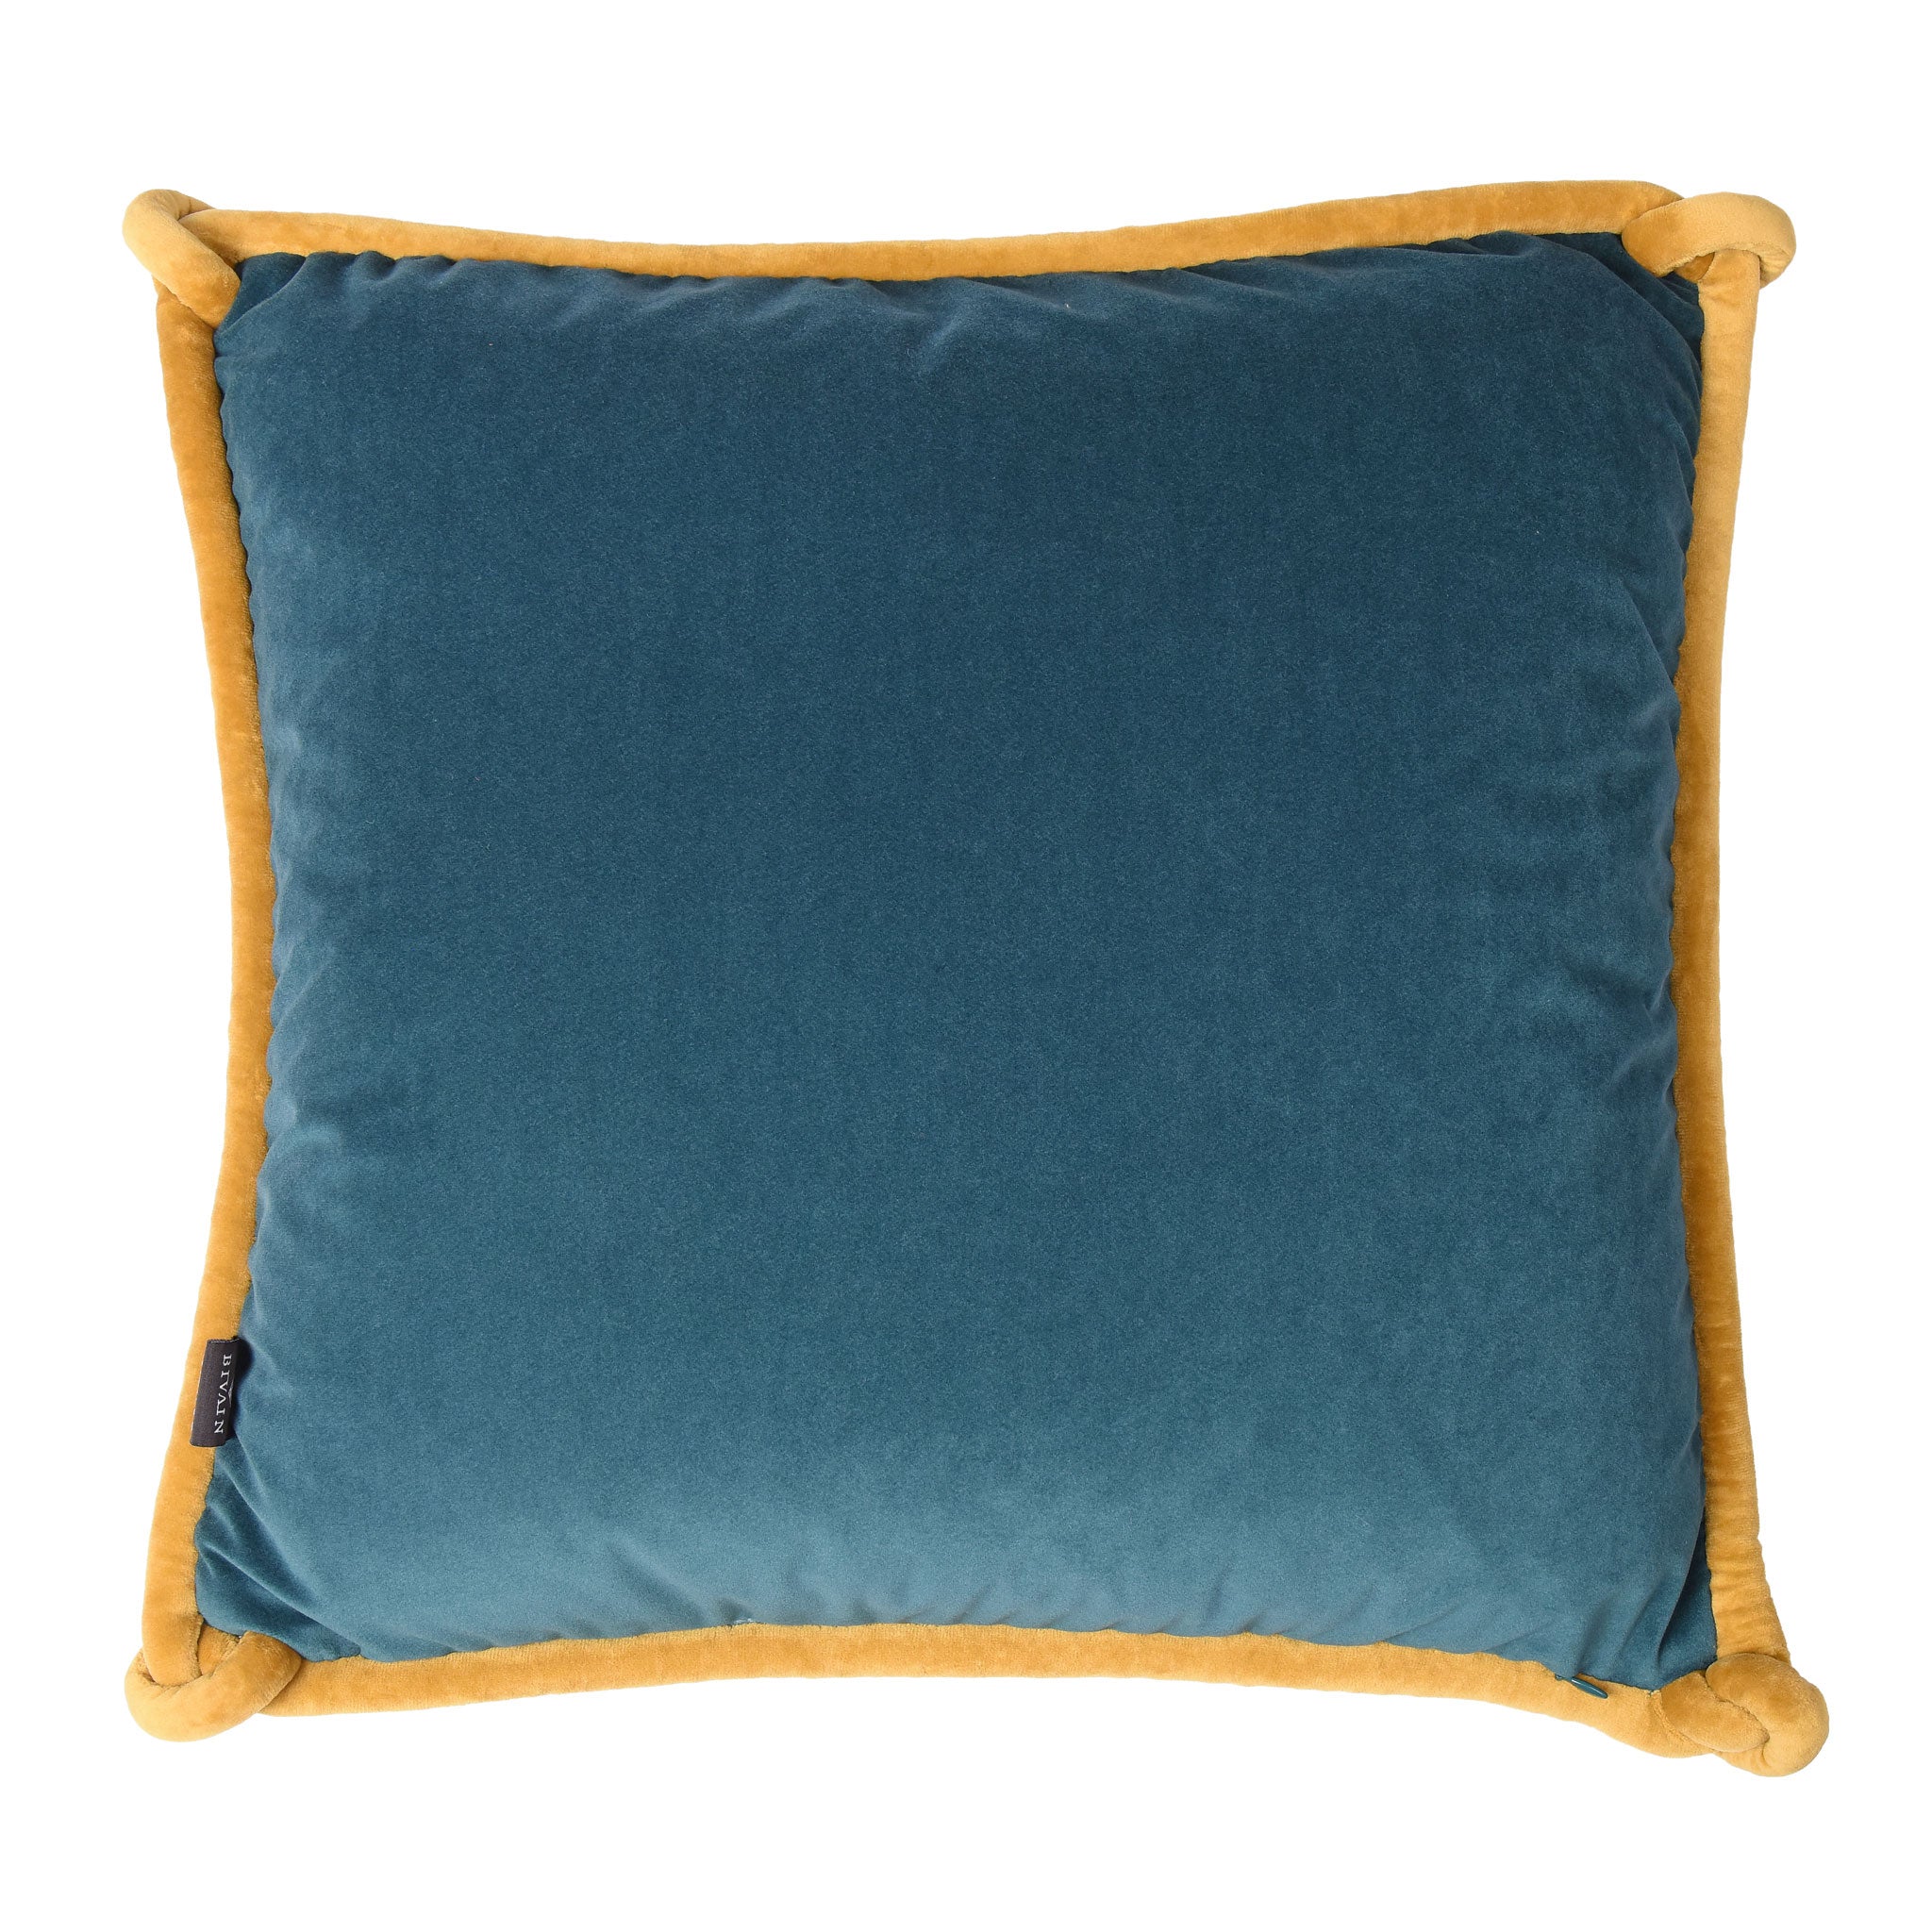 Teal & Ocean Blue Velvet Cushion with Yellow Knotted Piping